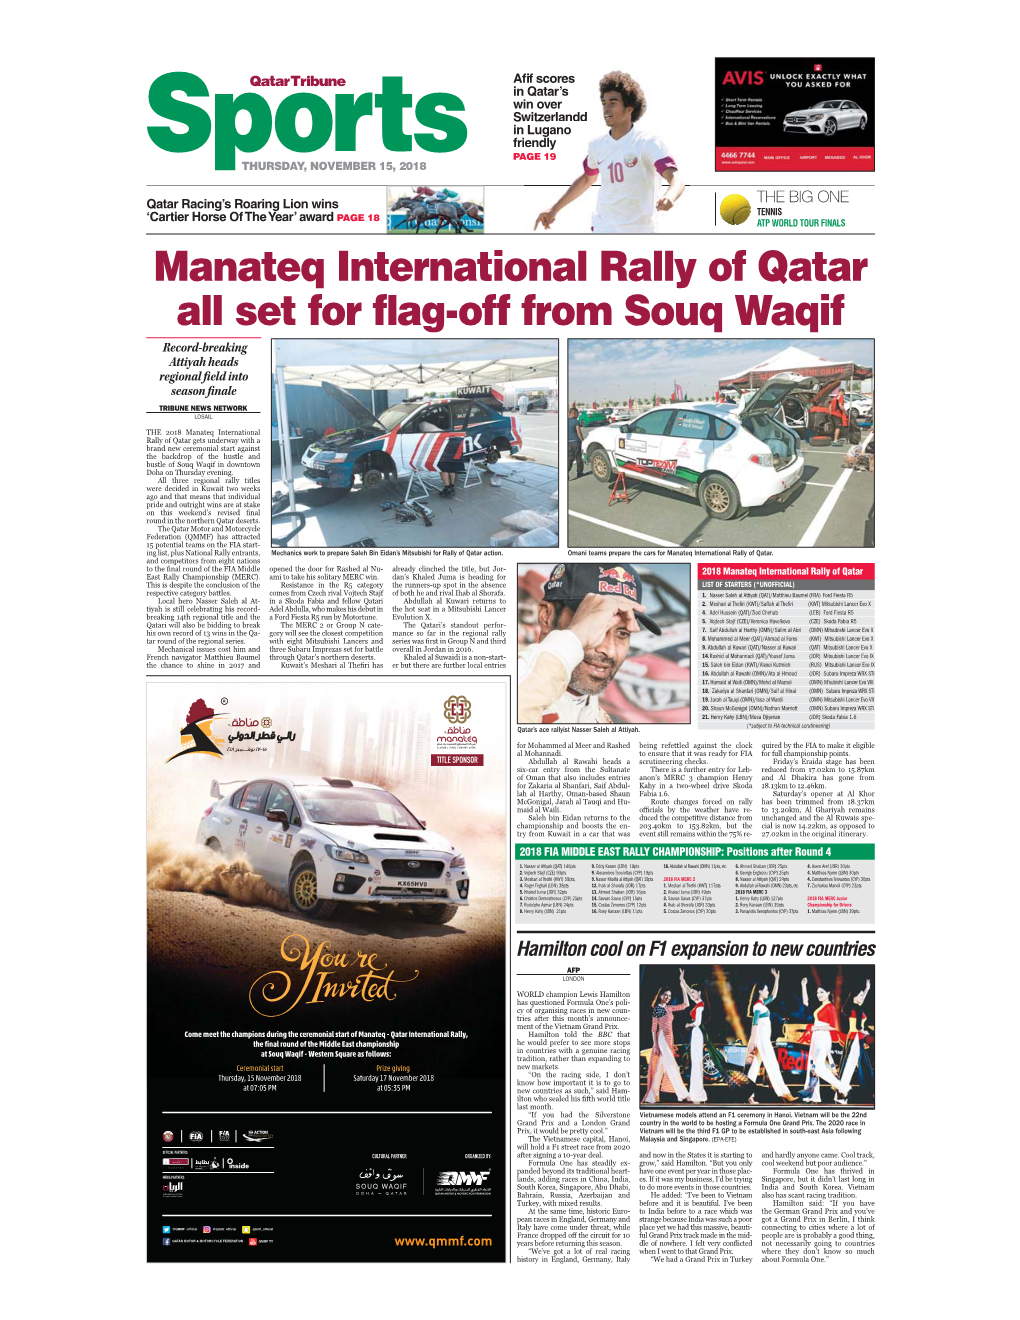 Manateq International Rally of Qatar All Set for Flag-Off from Souq Waqif Record-Breaking Attiyah Heads Regional Field Into Season Finale TRIBUNE NEWS NETWORK LOSAIL